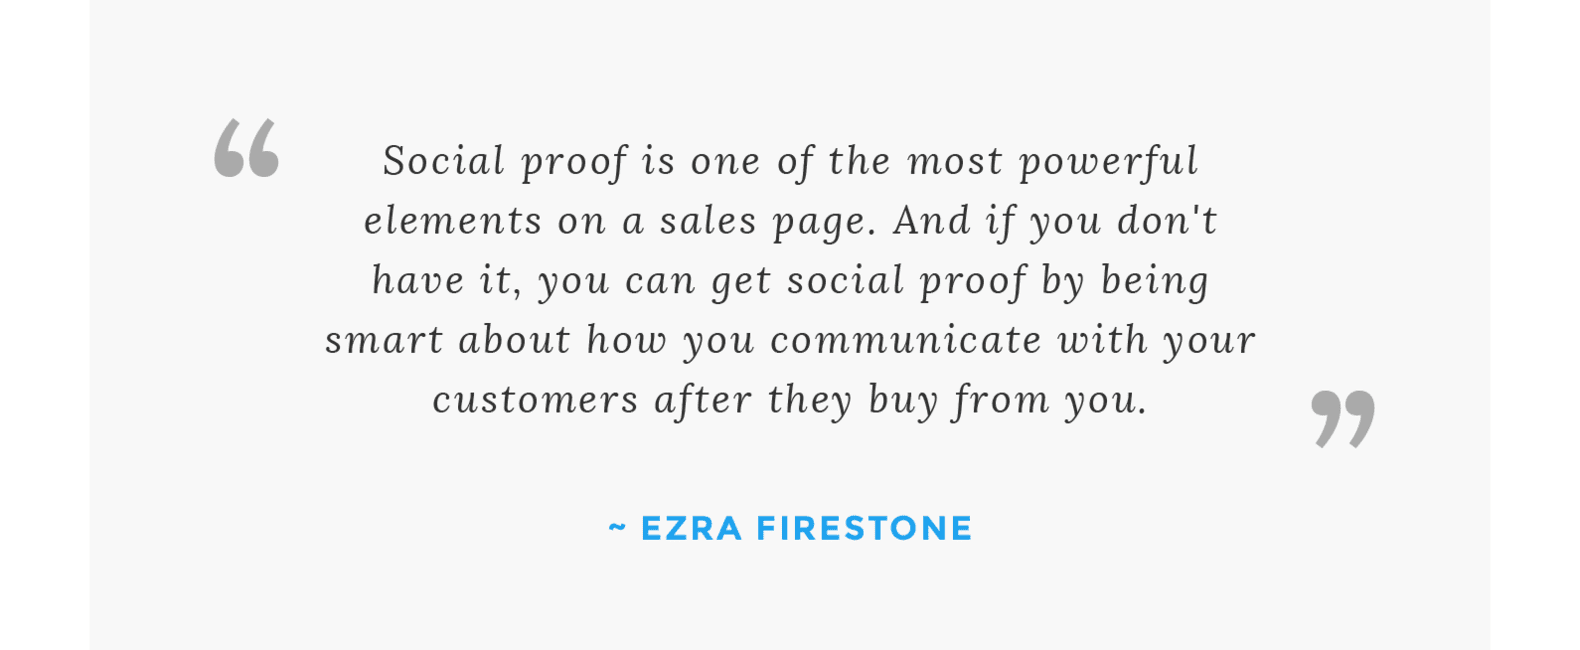 “Social proof is one of the most powerful elements on a sales page. And if you don't have it, you can get social proof by being smart about how you communicate with your customers after they buy from you.” - Ezra Firestone